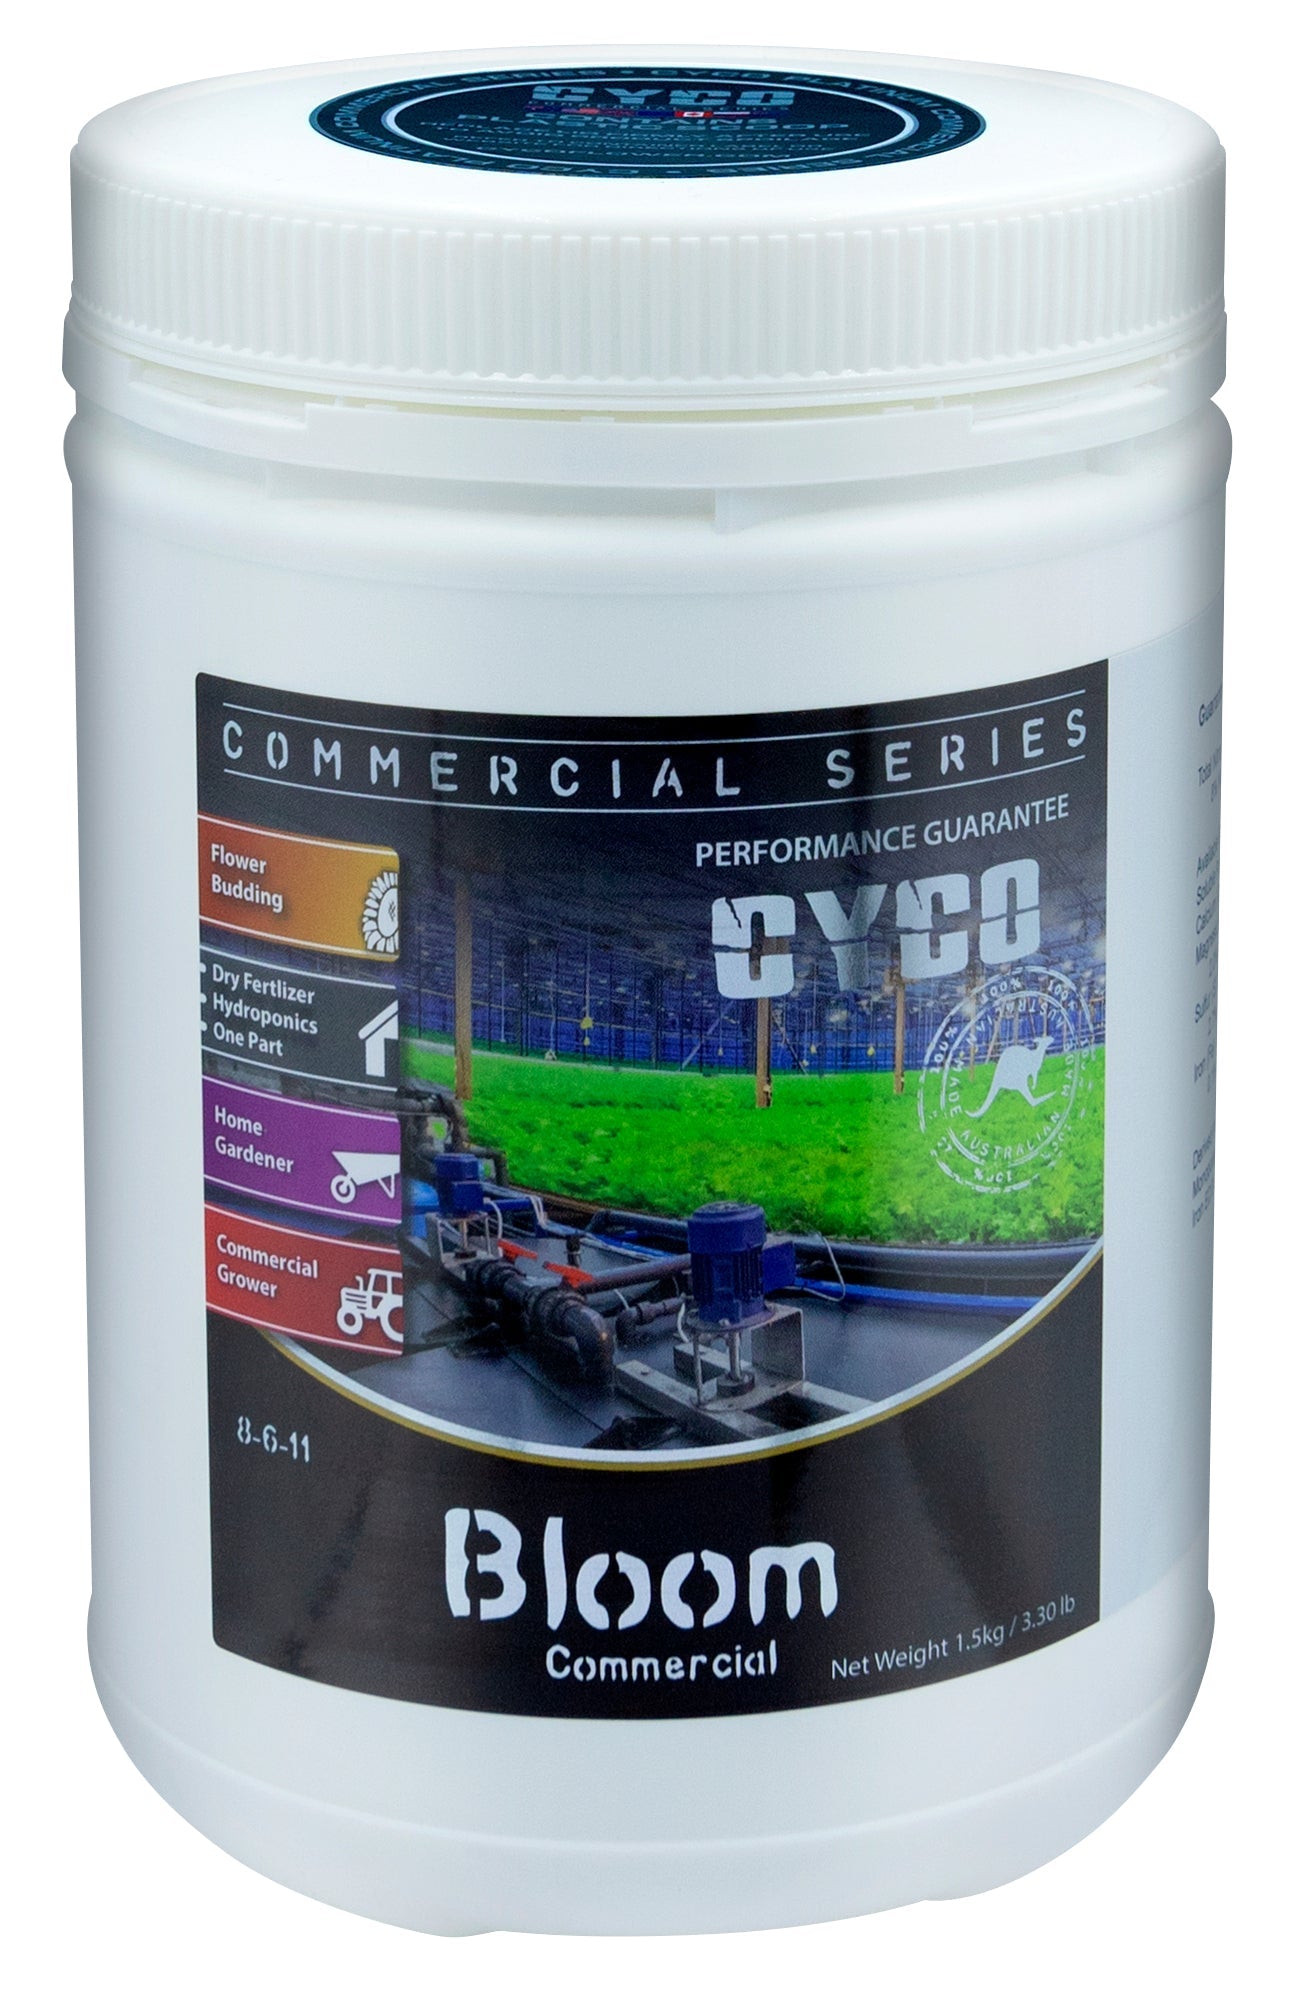 CYCO Commercial Series Bloom - 815 Gardens